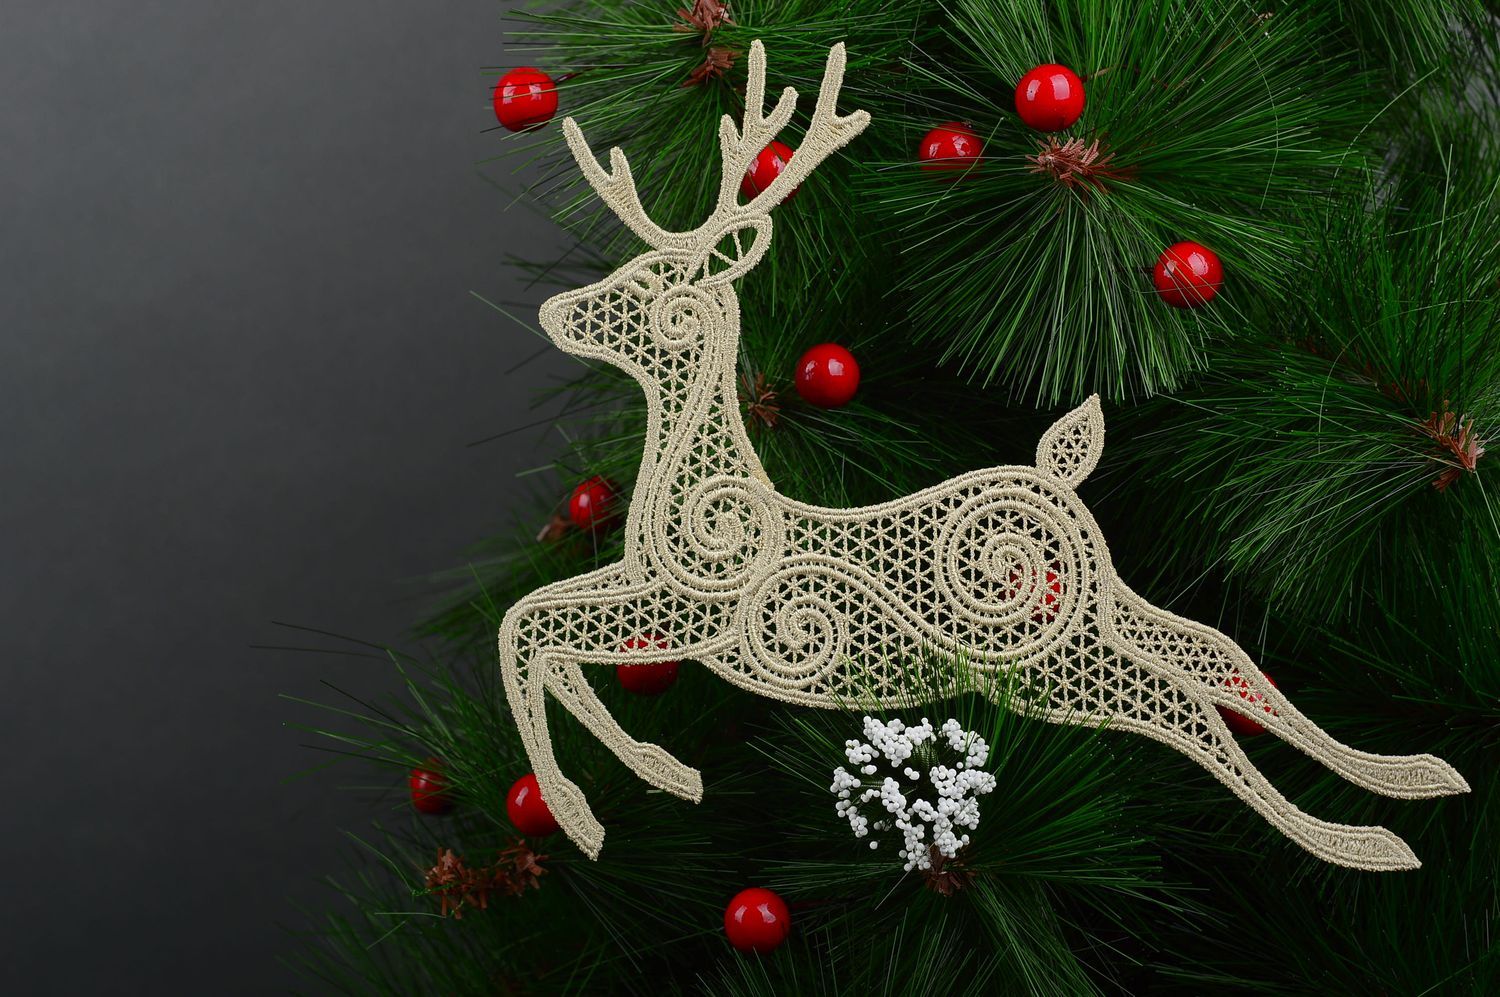 Deer Christmas toy lace toy openwork Christmas toy decorative use only photo 1